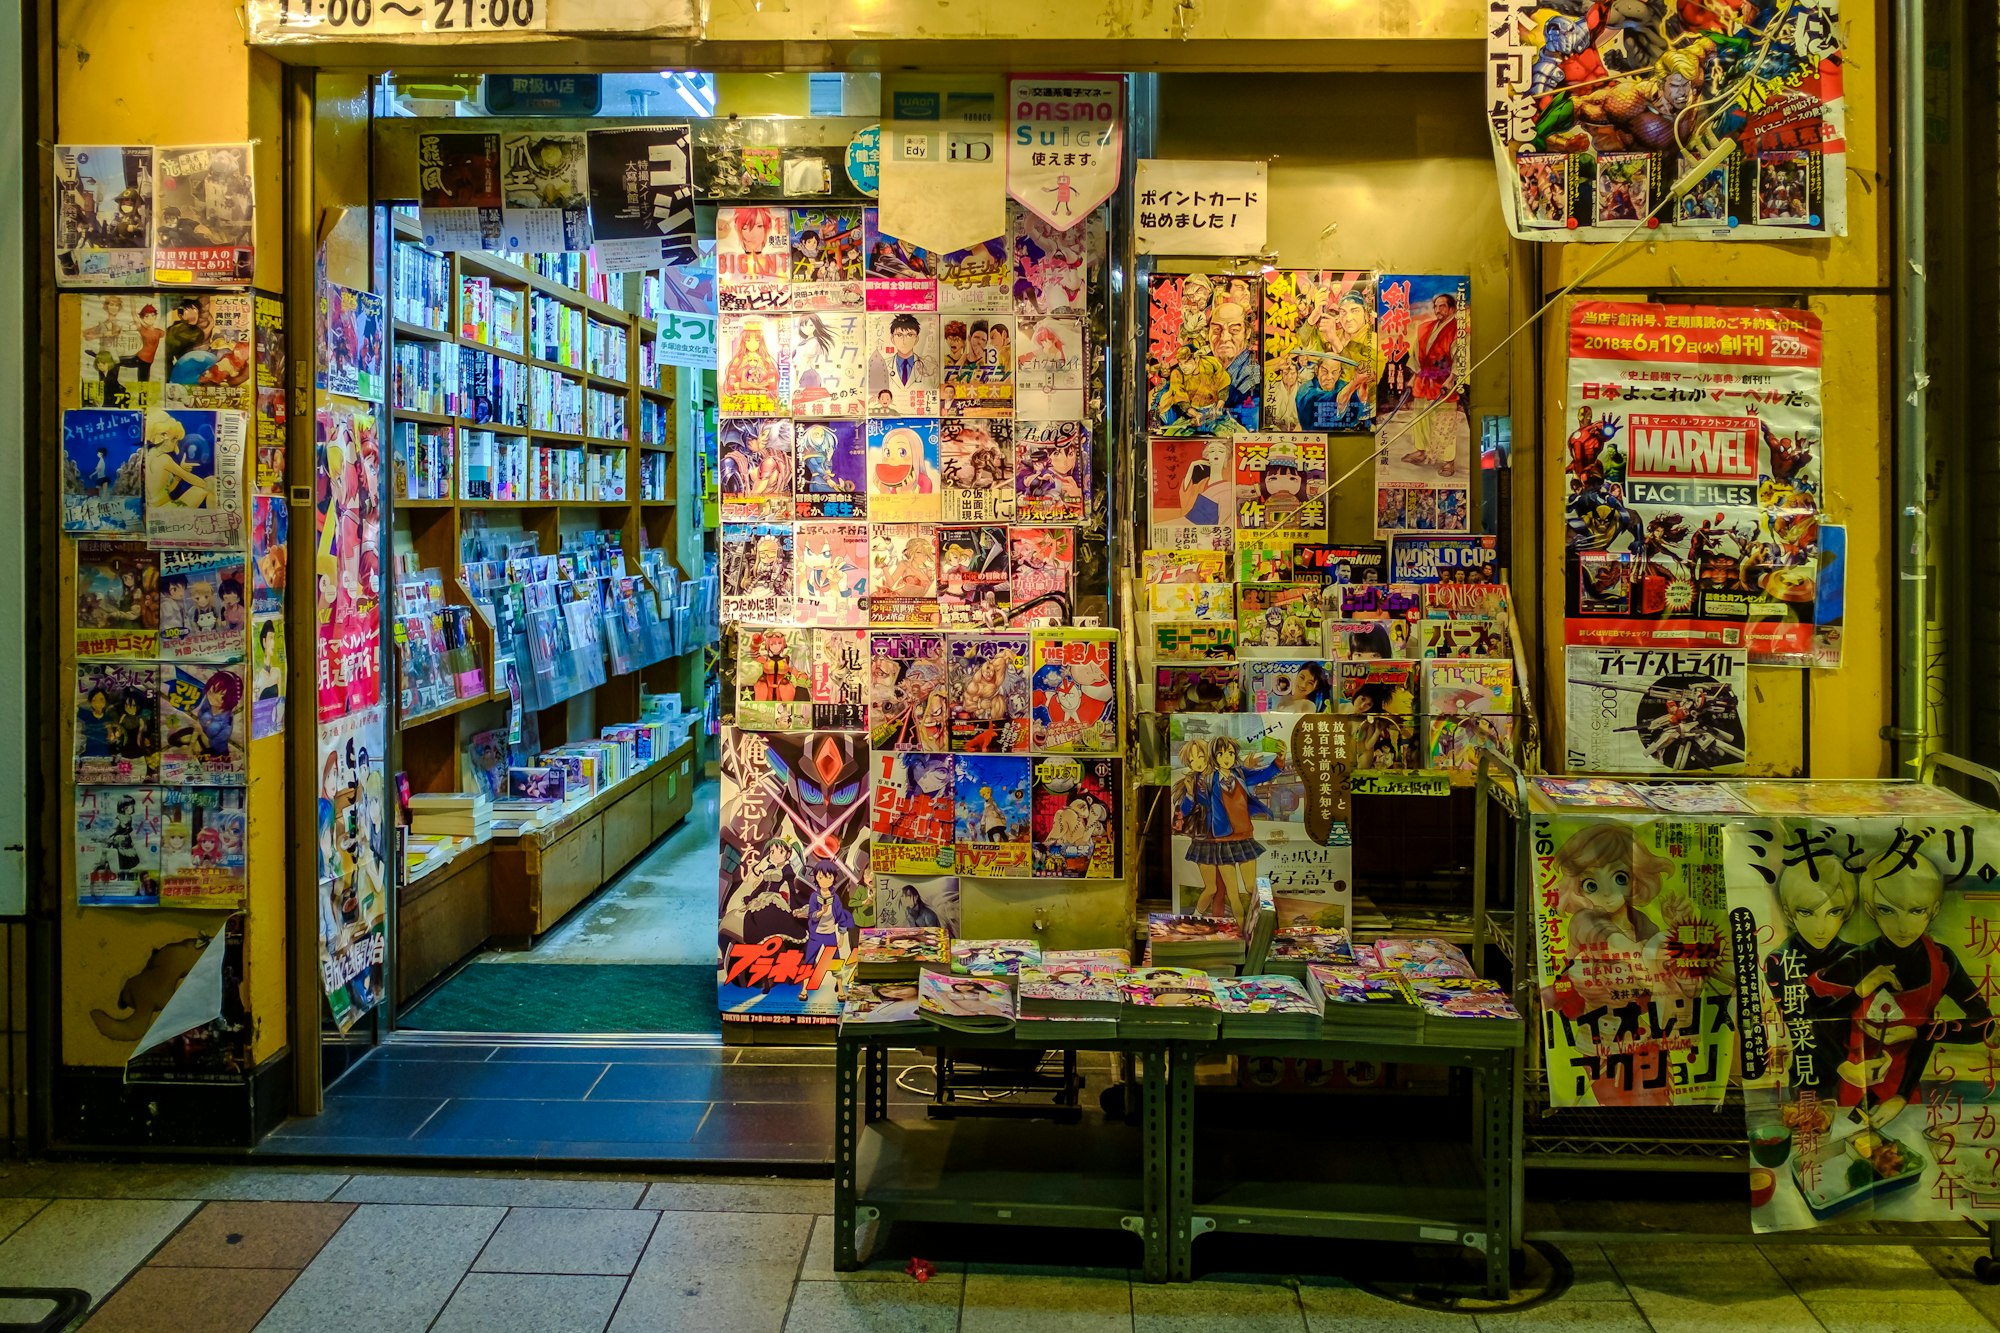 Comic book store in Tokyo Japan.Tokyo is the combination of 26 neighbourhoods, every singel one with it's own identity. Every neighbourhood has a commercial area the has neon, shops, restaurants and people. 